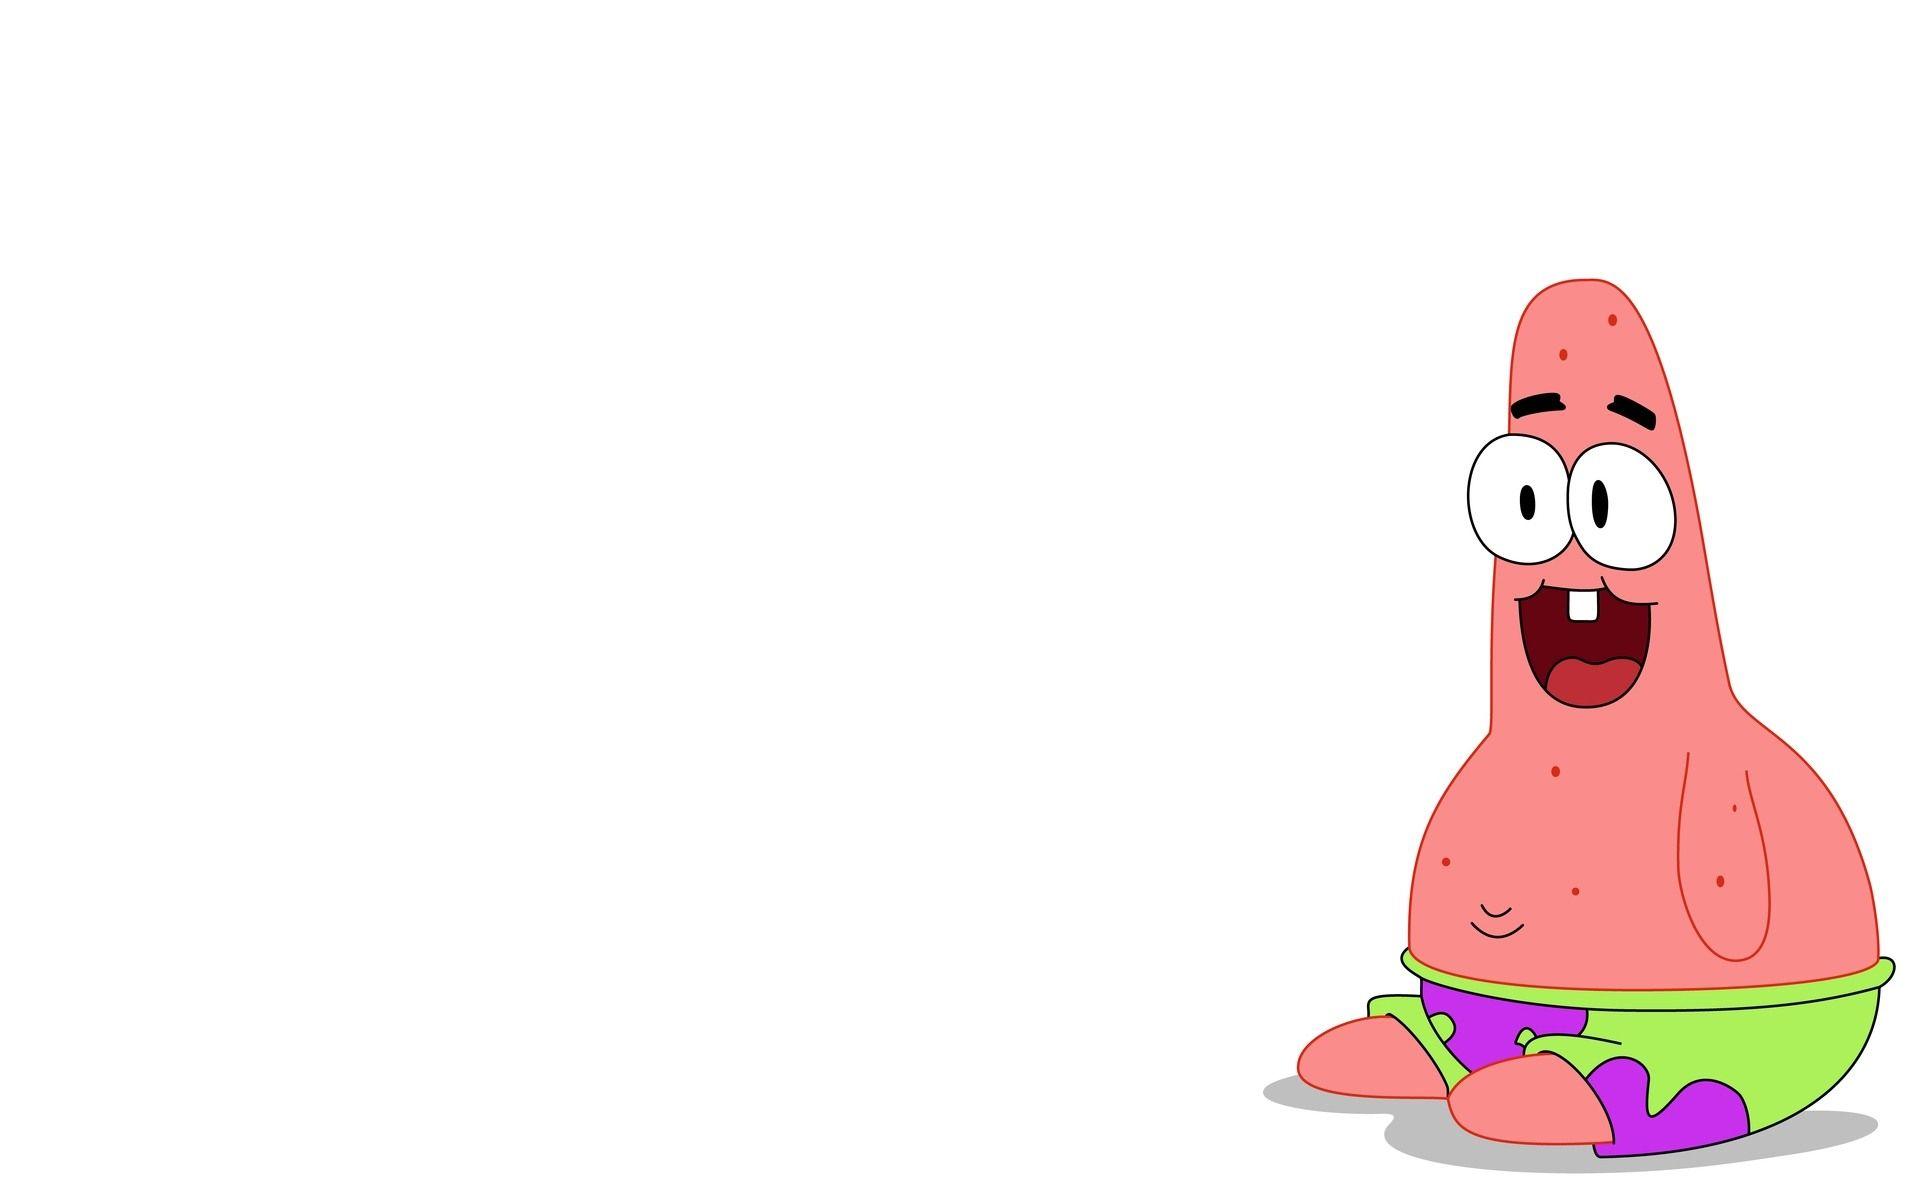 patrick star backgrounds – 1920×1200 High Definition Wallpapers